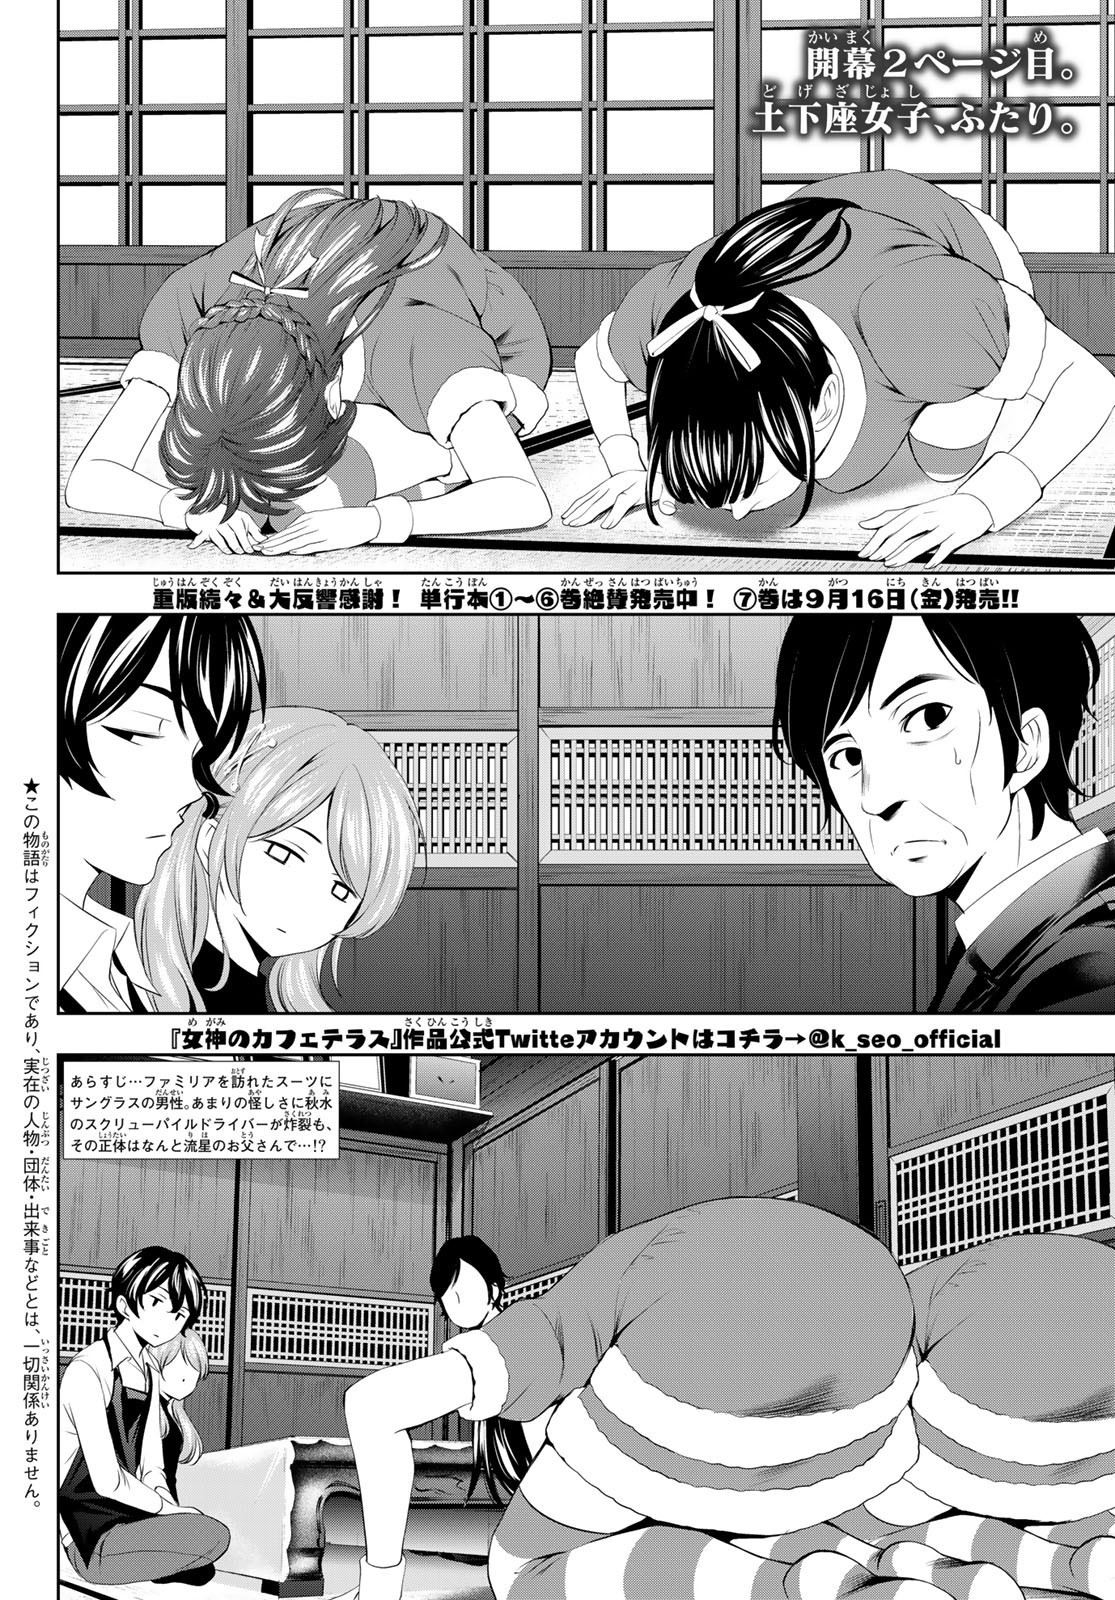 Goddess-Cafe-Terrace - Chapter 071 - Page 2